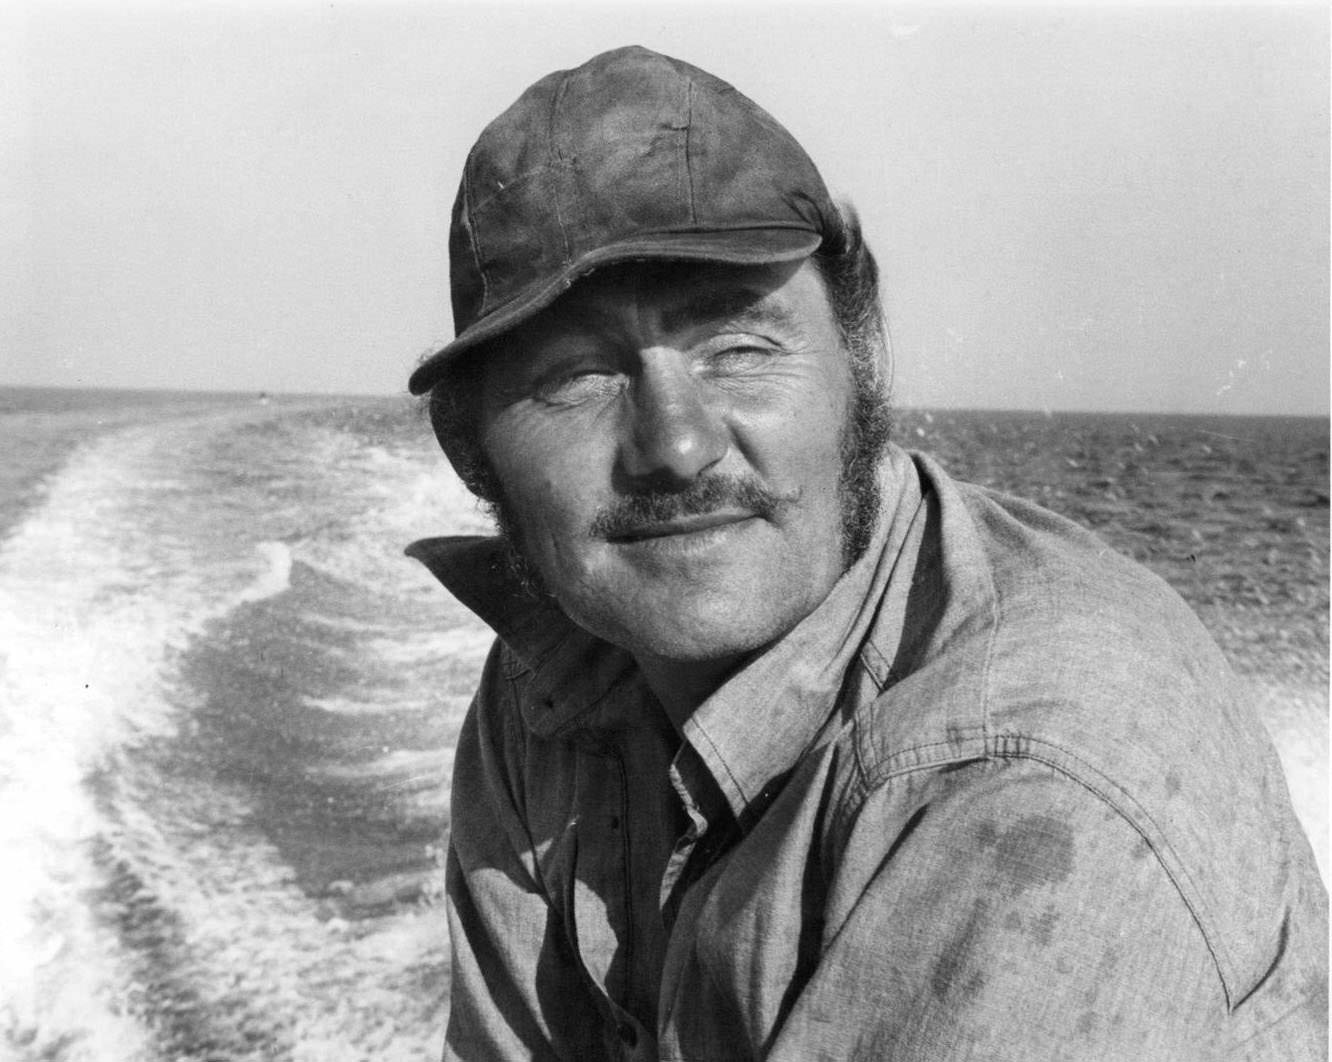 Robert Shaw stands around netting in a scene from the film 'Jaws', 1975.